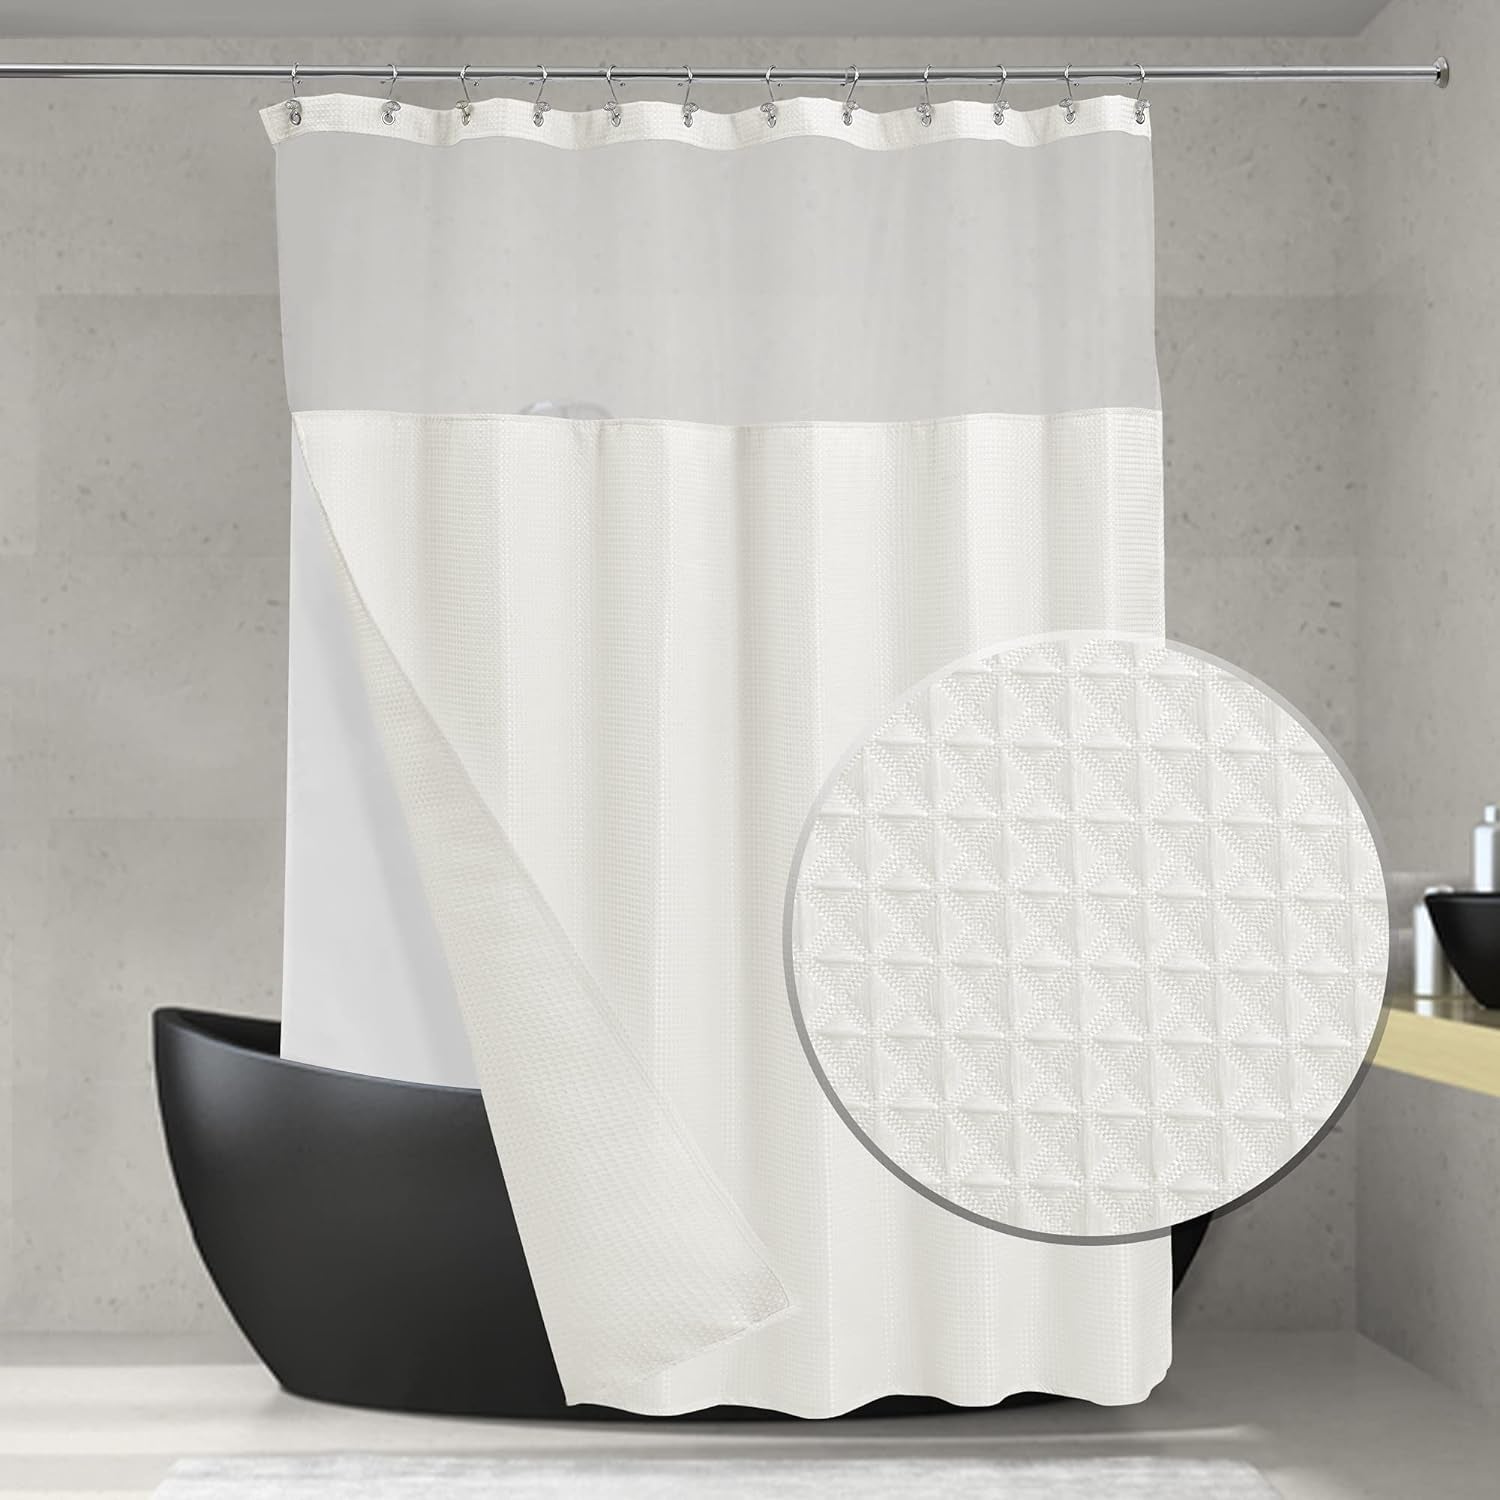 ALYVIA SPRING Waffle Weave Shower Curtain with Snap-In Fabric Liner & Hooks Set: Hotel Style & Top Sheer Window, Double Layers & Machine Washable for Easy Clean, 71X72, White